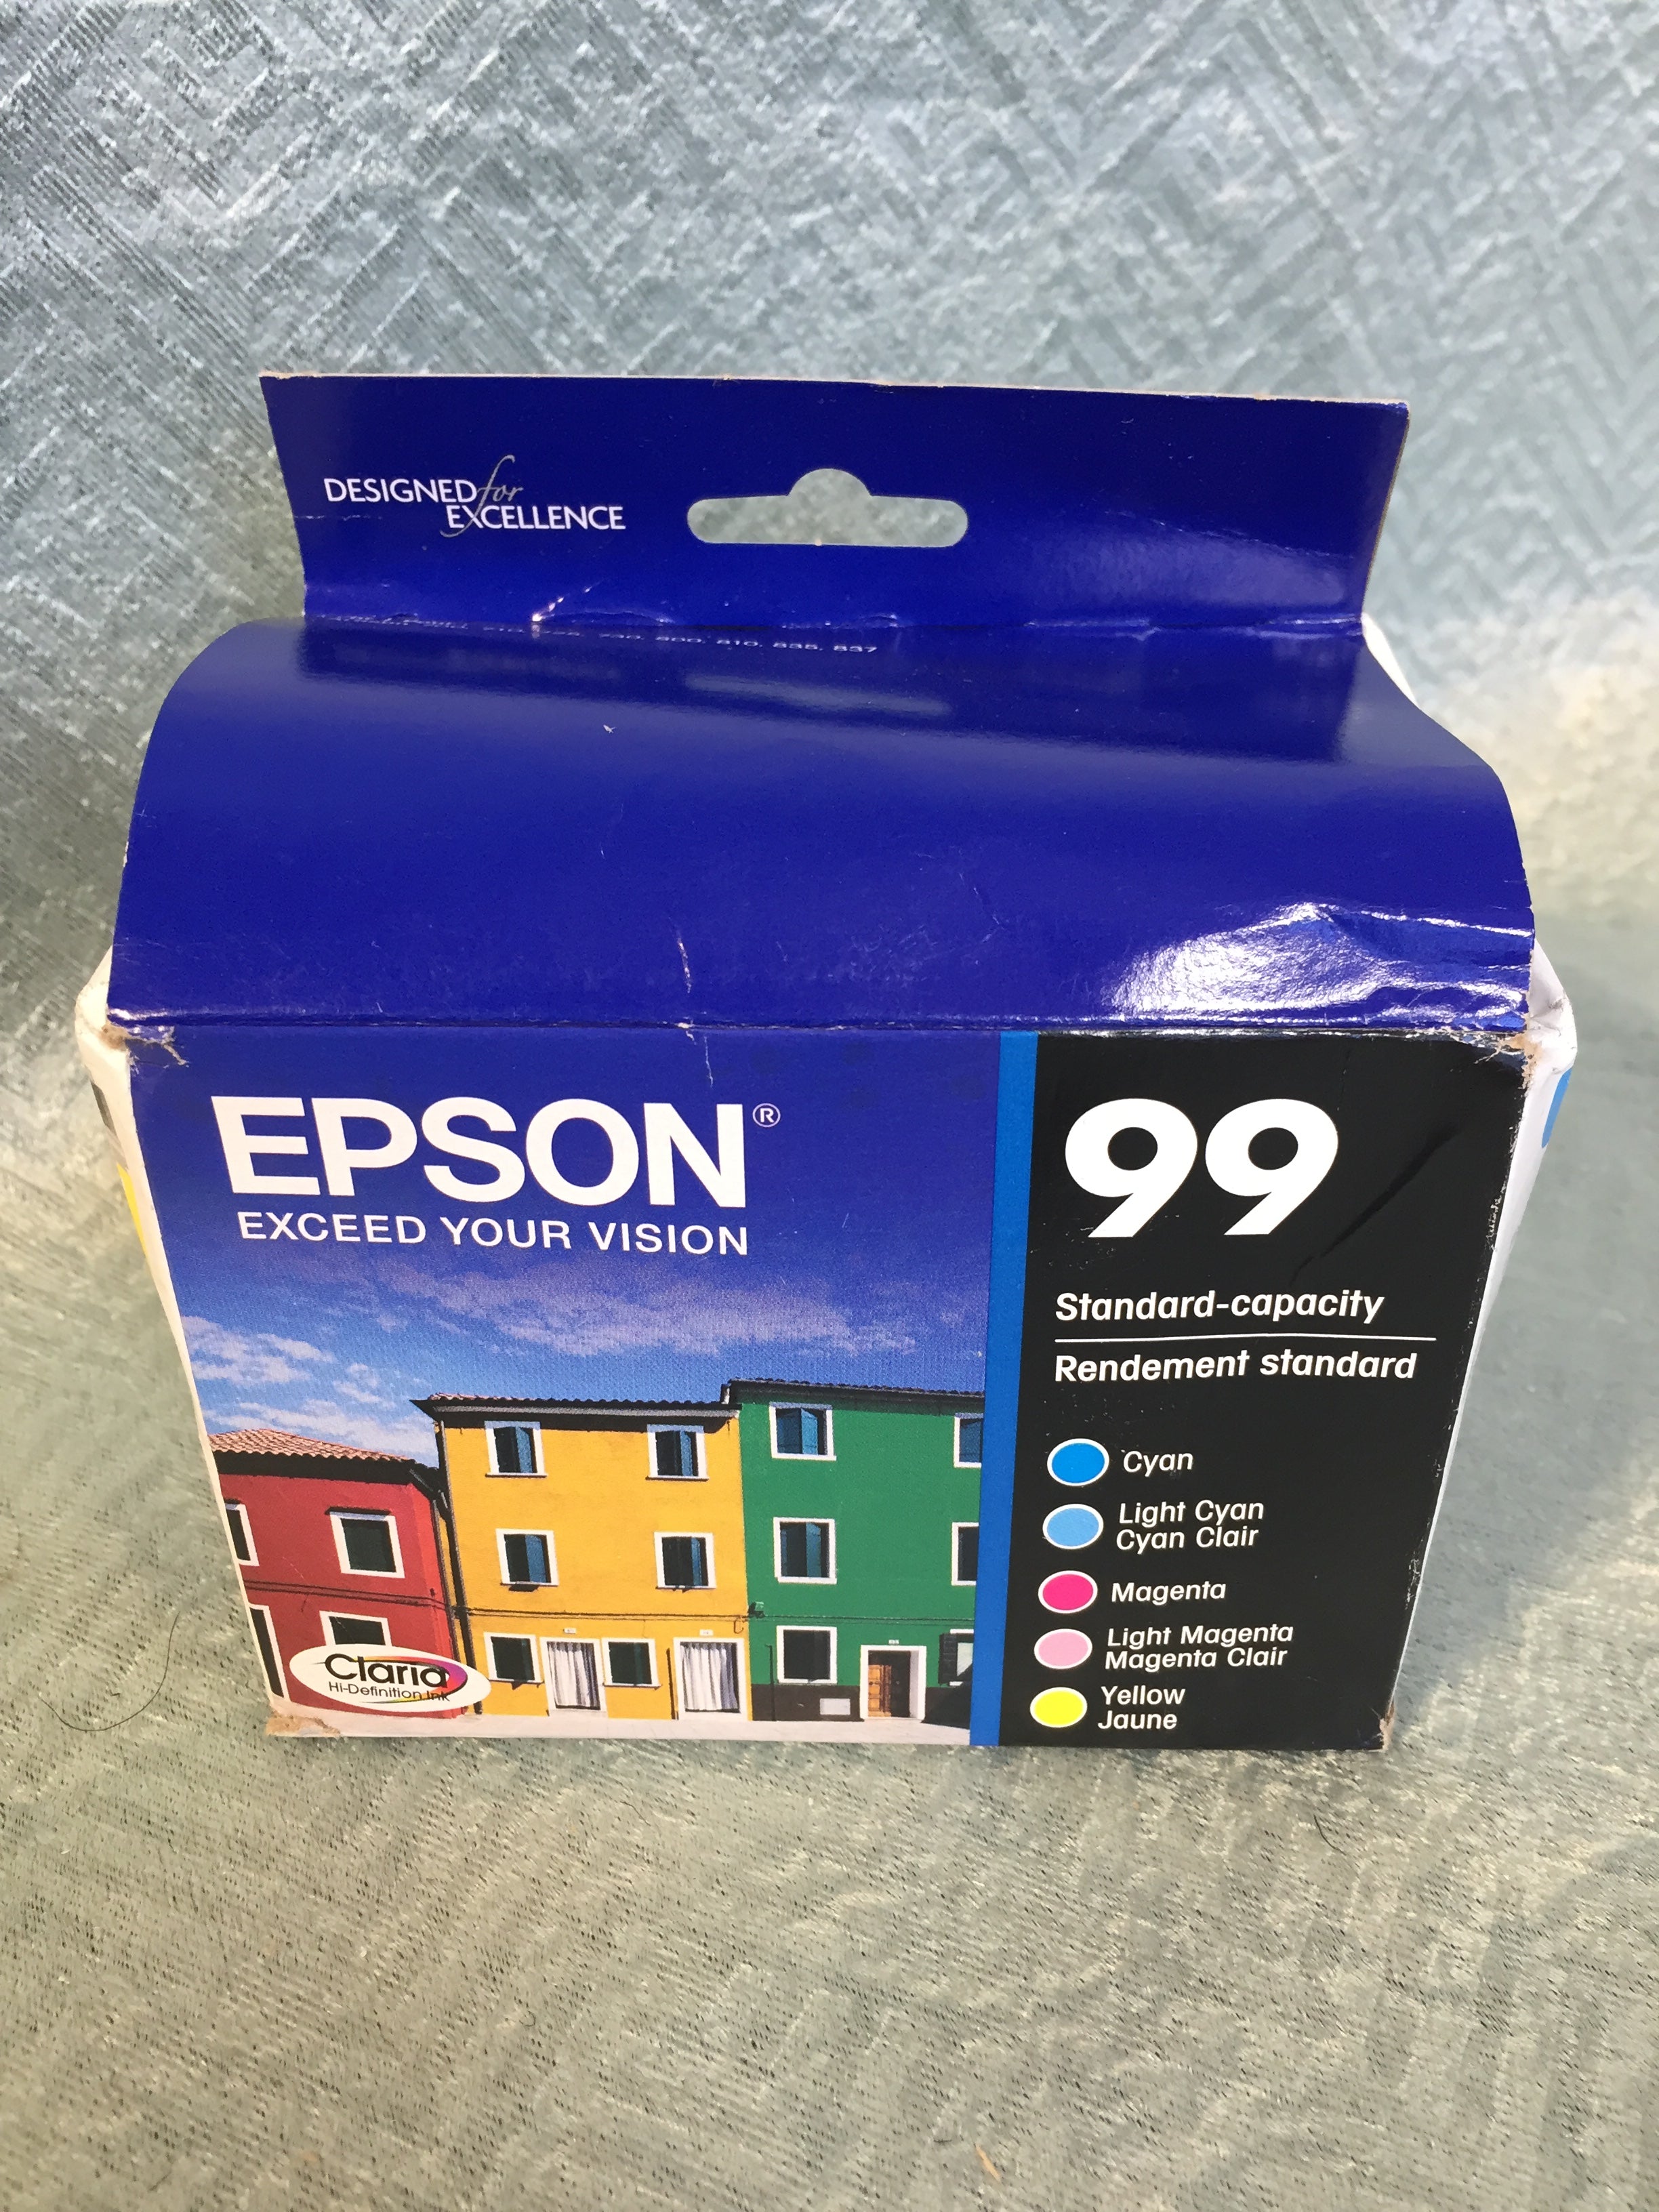 EPSON T099 Claria Hi-Definition Ink Standard Capacity 5 Color Cartridge Combo (7610049233134)